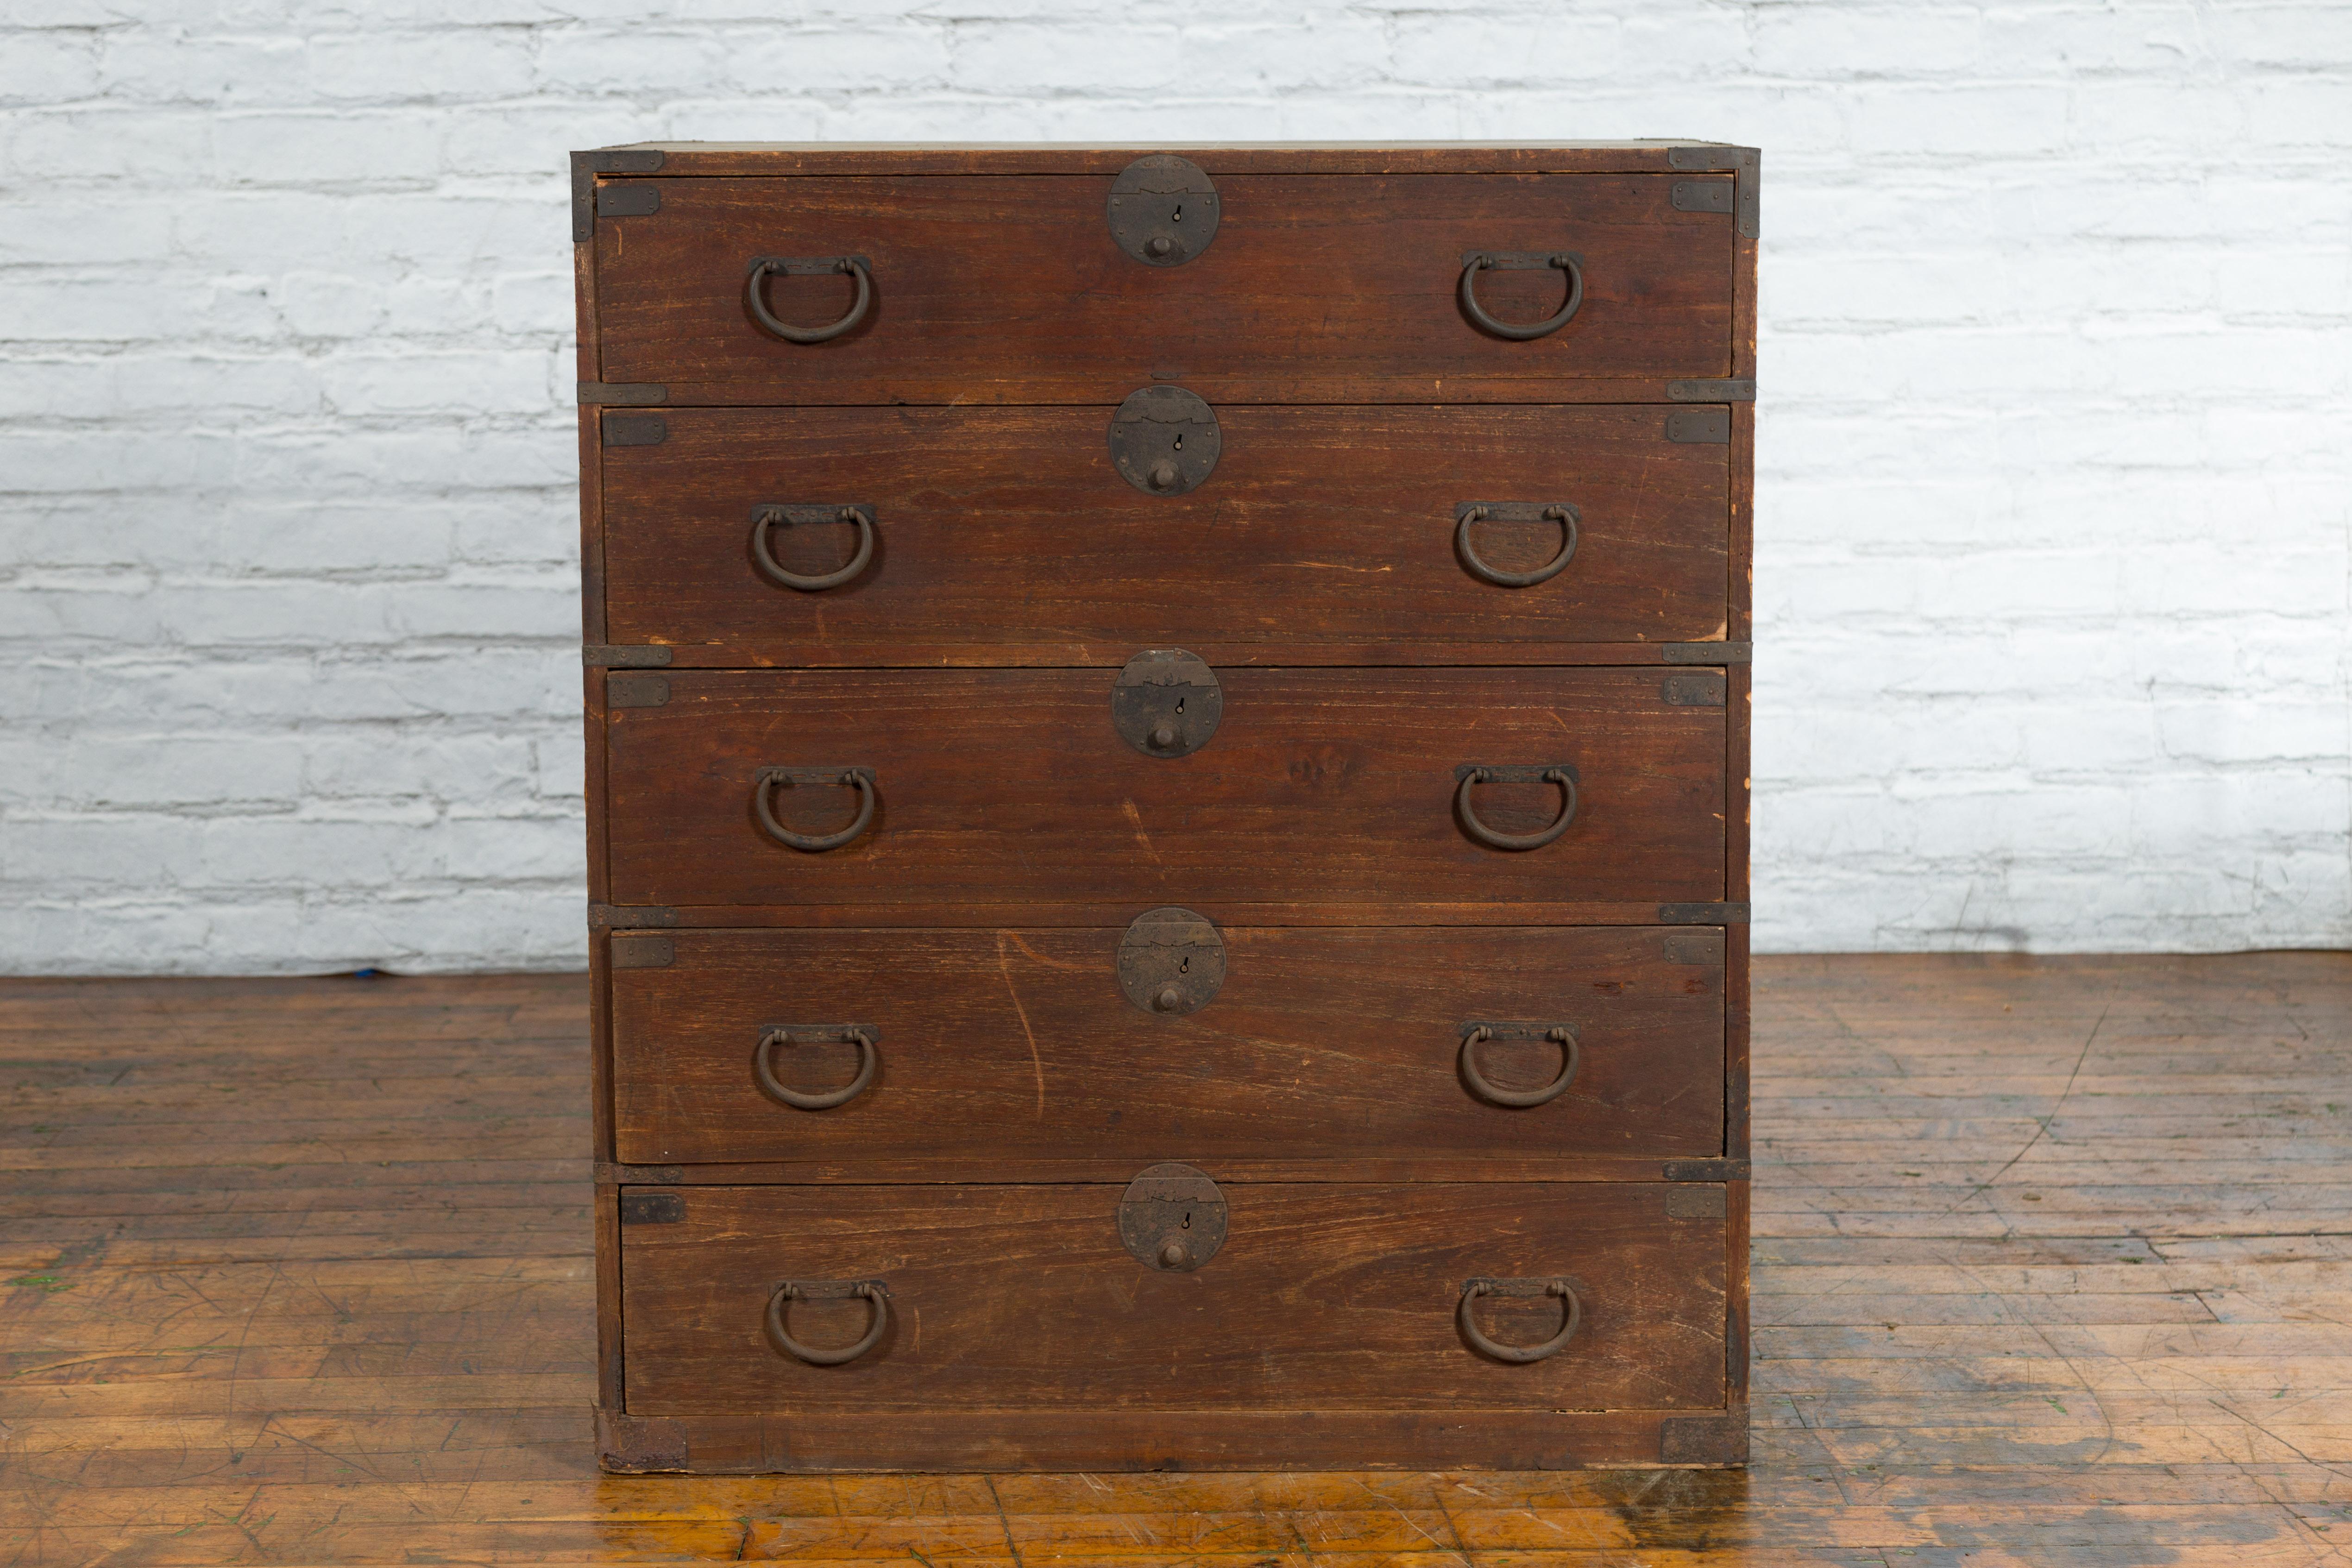 A Japanese Taisho period wooden tansu clothing chest from the early 20th century in Isho-dansu style, with five drawers and iron hardware. Created in Japan during the Taisho period in the early years of the 20th century, this wooden Isho-dansu